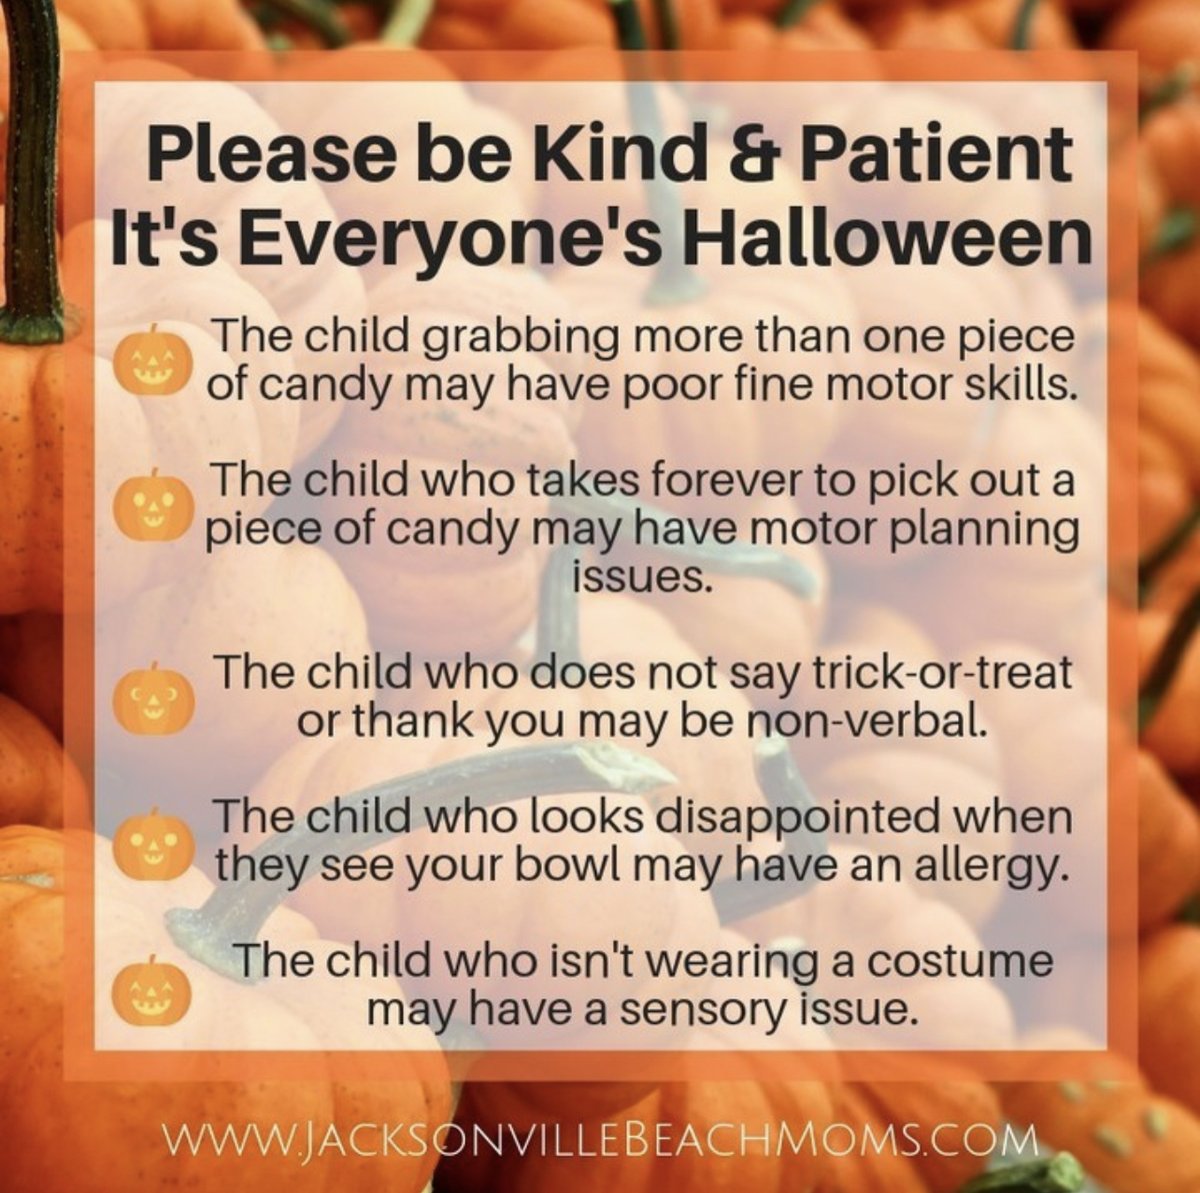 I loved this message and wanted to give a shoutout to @JaxBeachMoms for this important #Halloween reminder! Today, let's remember to be inclusive of every trick-or-treater. By understanding each child's unique needs, we can help make this holiday fun for all across our community.